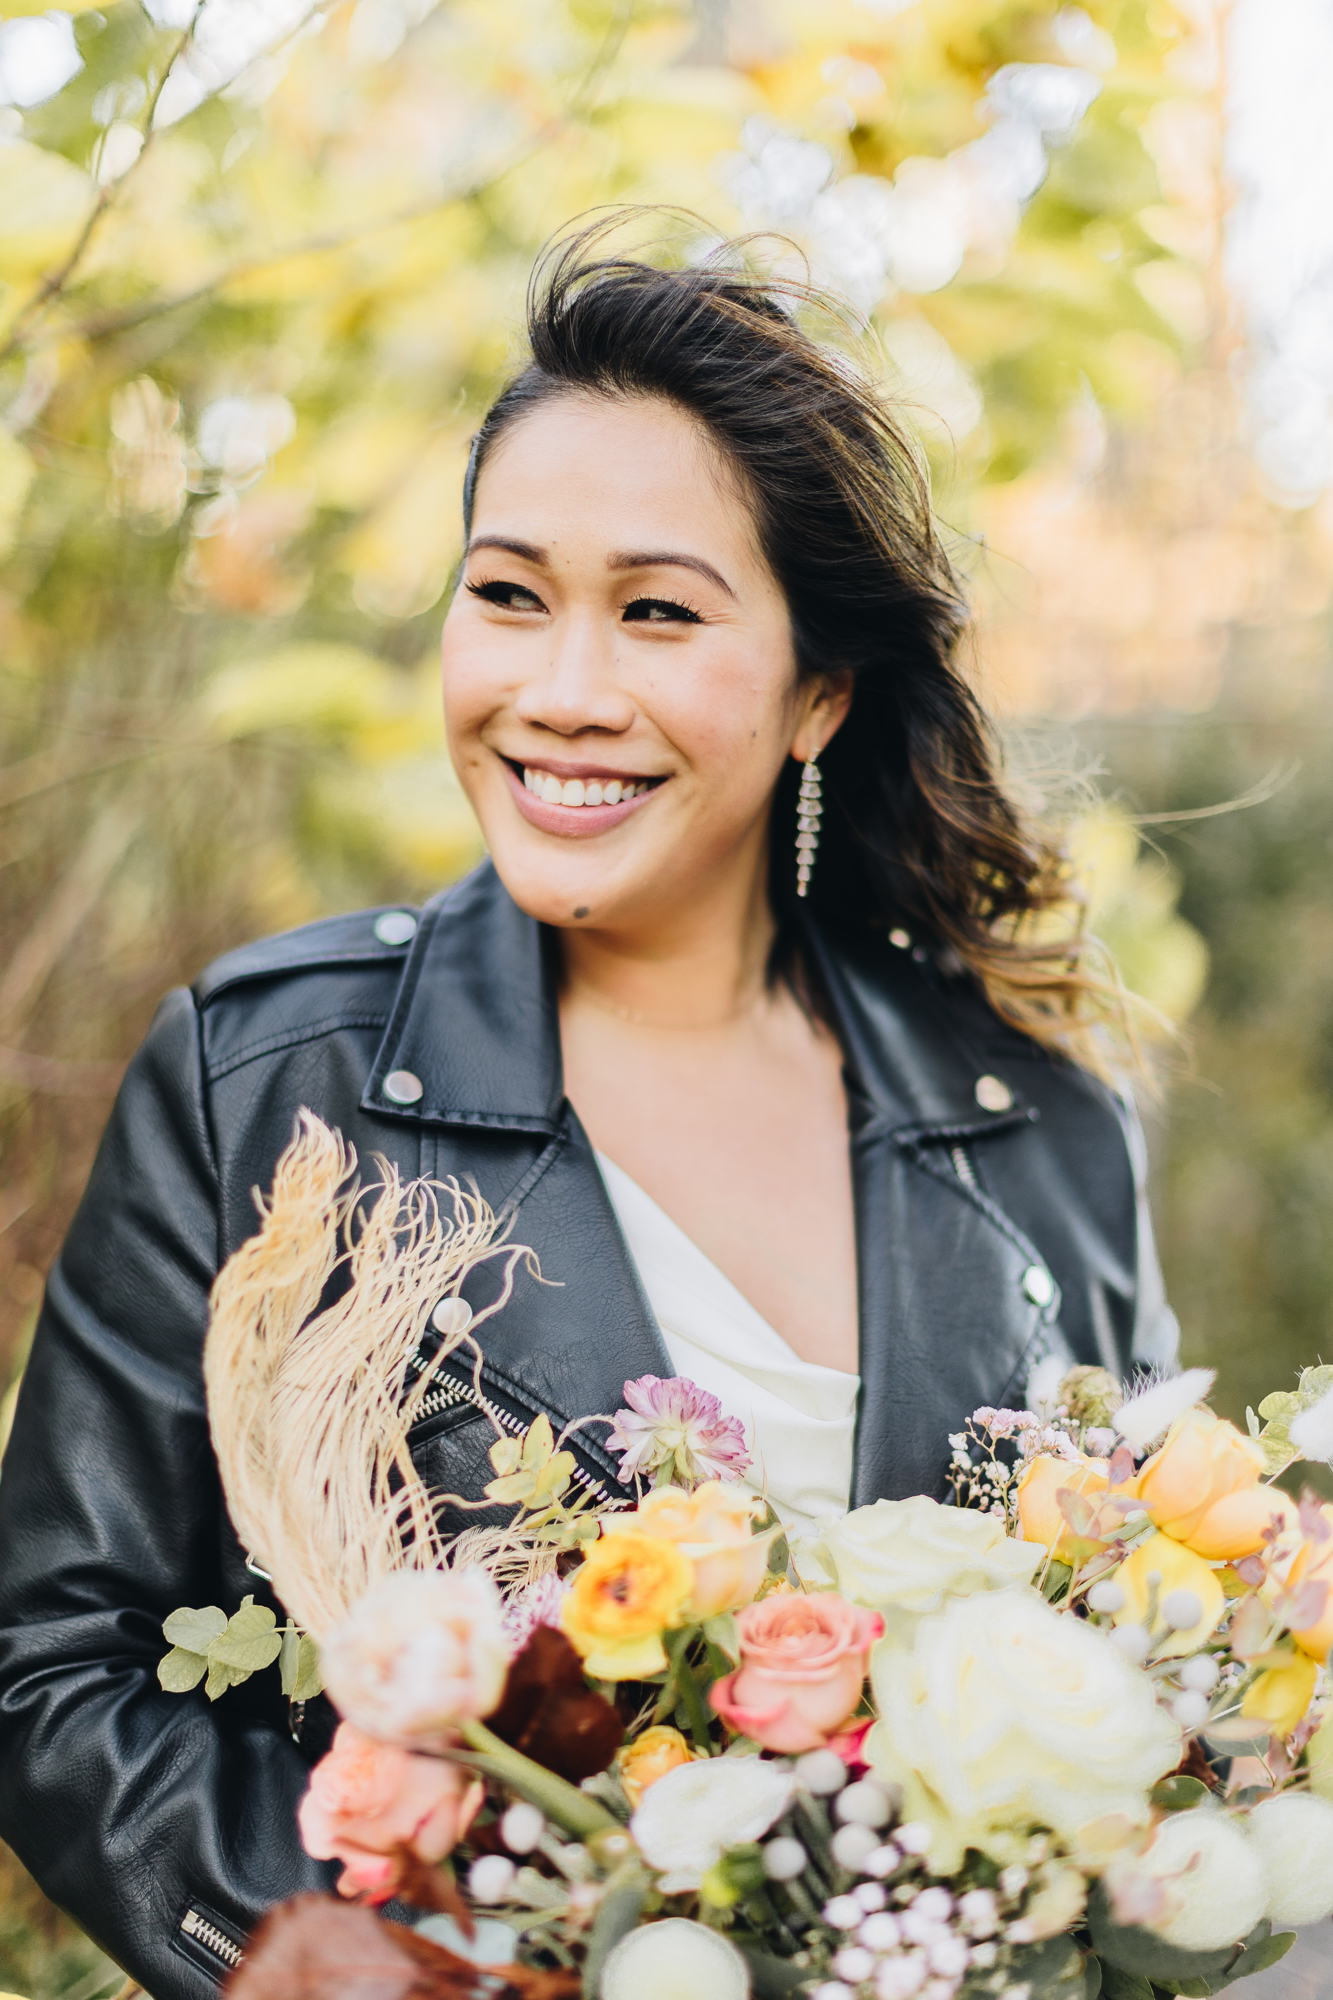 Stunning Fall DUMBO Elopement with New York views and foliage